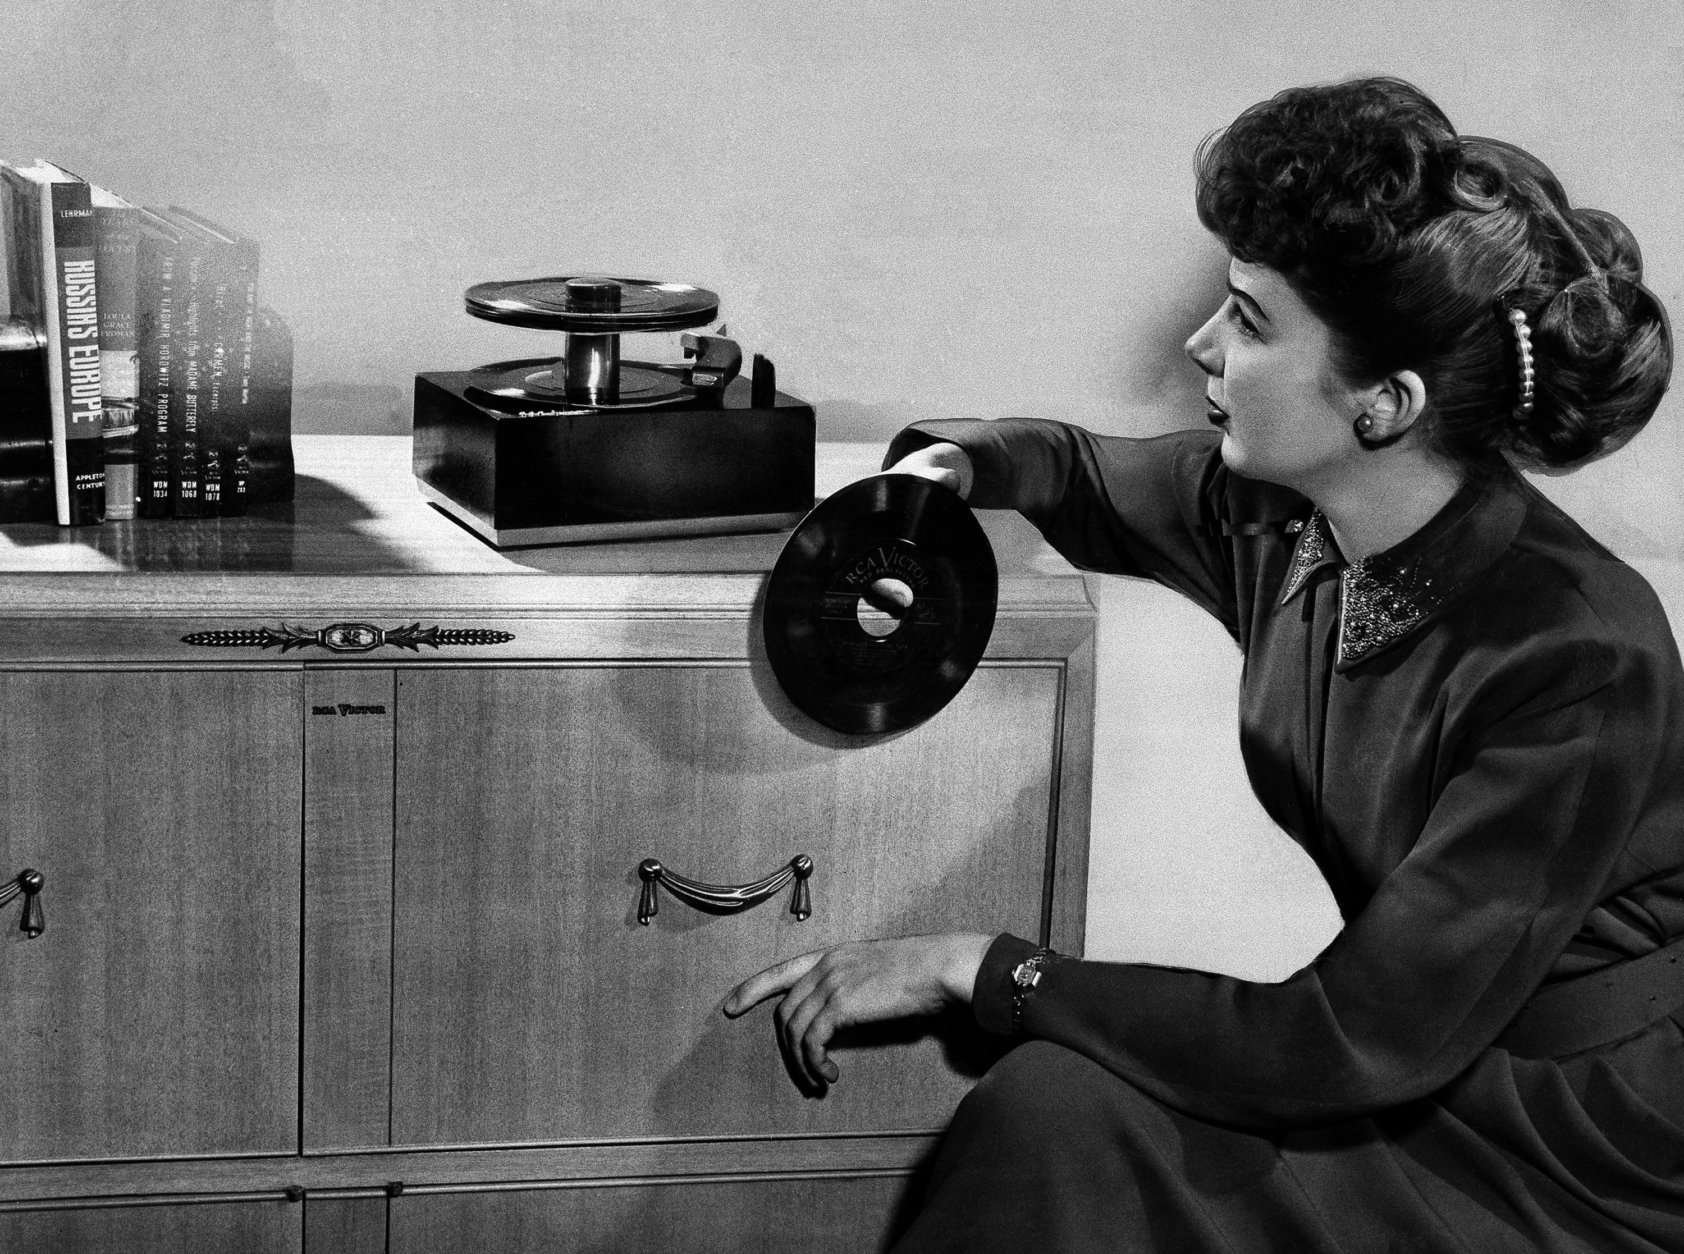 RCA Victor's new 45-RPM phonograph &amp; records. Finest Quality reproduction at low cost in history of Industry credited to new system; first single disc size for all pops and classics. Undated photo. (AP Photo)